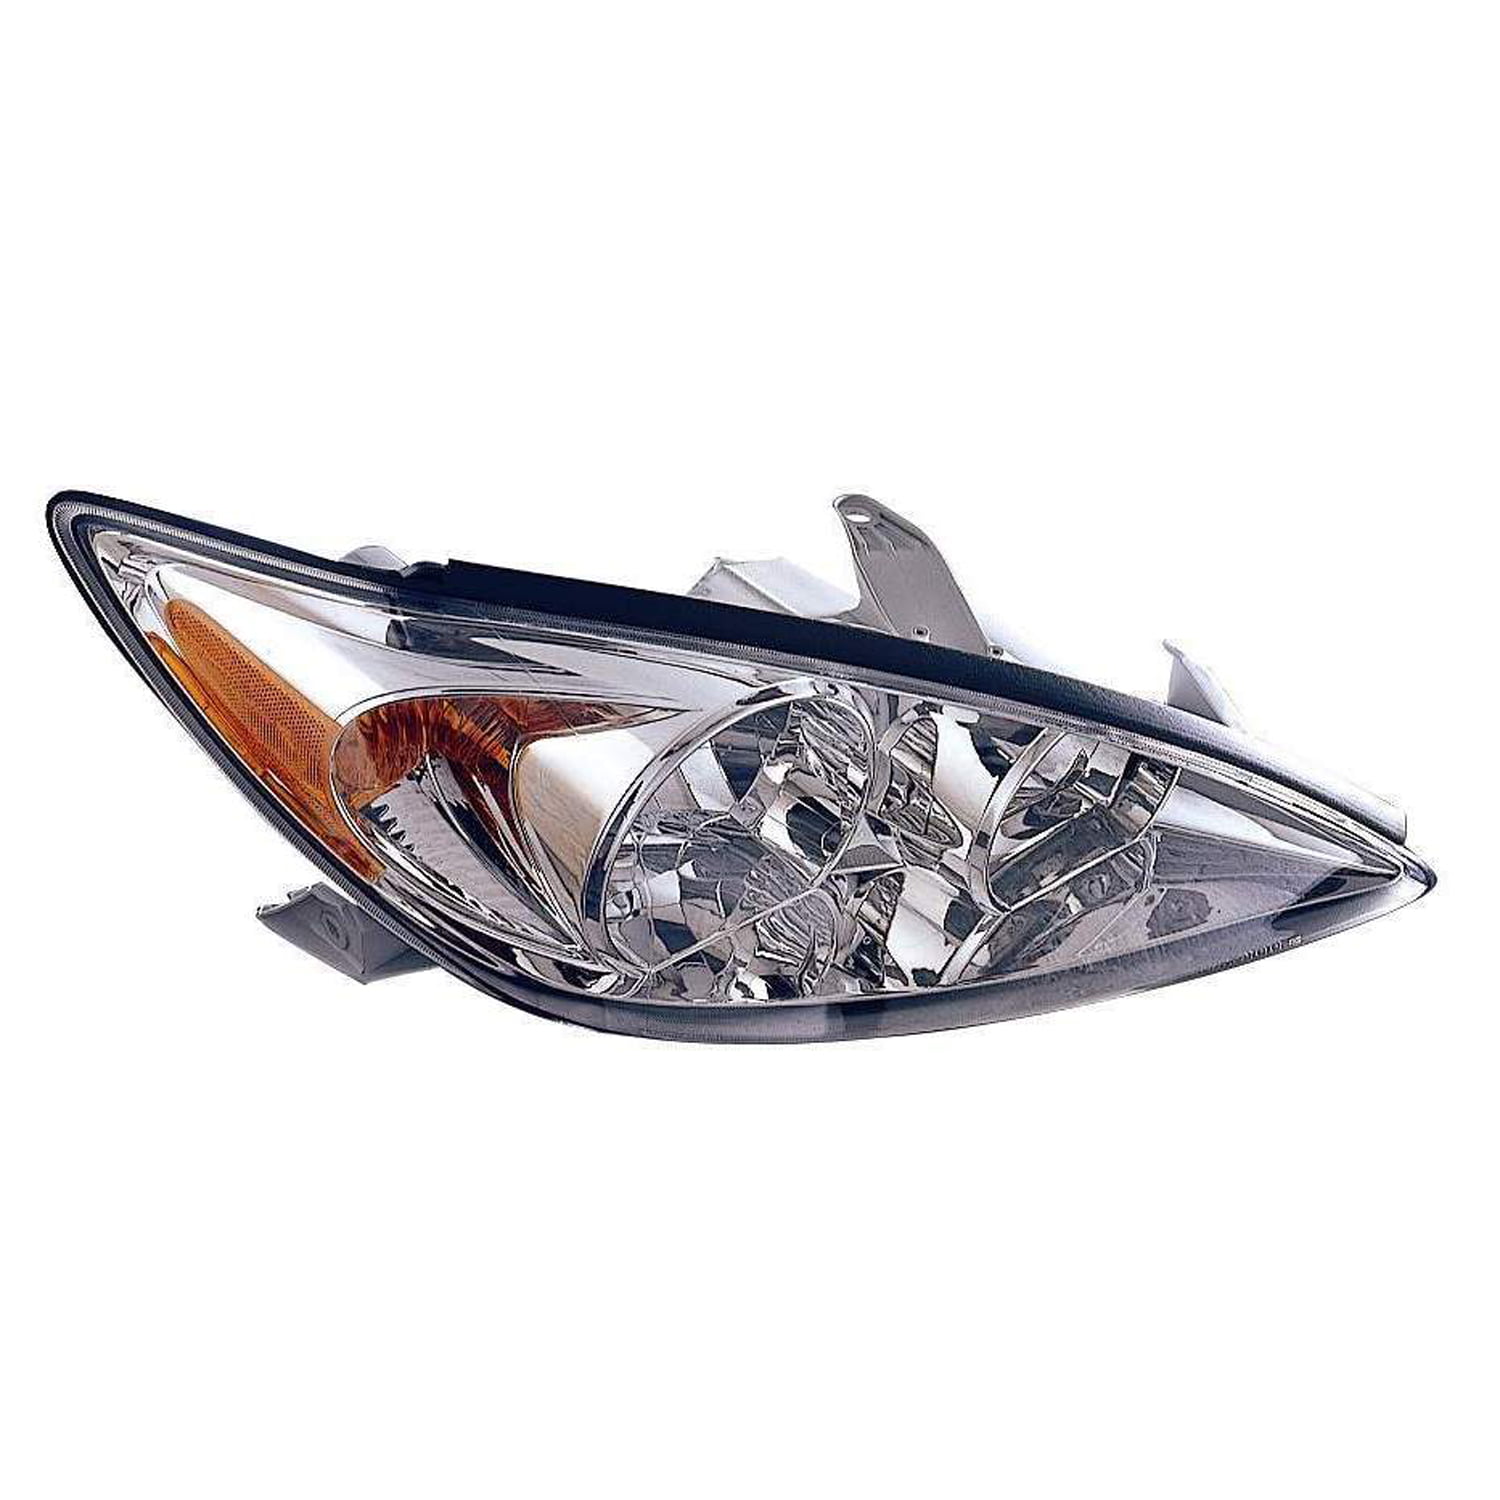 Aftermarket 2002-2004 Toyota Camry LE Sedan 4-Door Aftermarket Passenger Side Front Head Lamp 2002 Toyota Camry Le Headlight Bulb Replacement